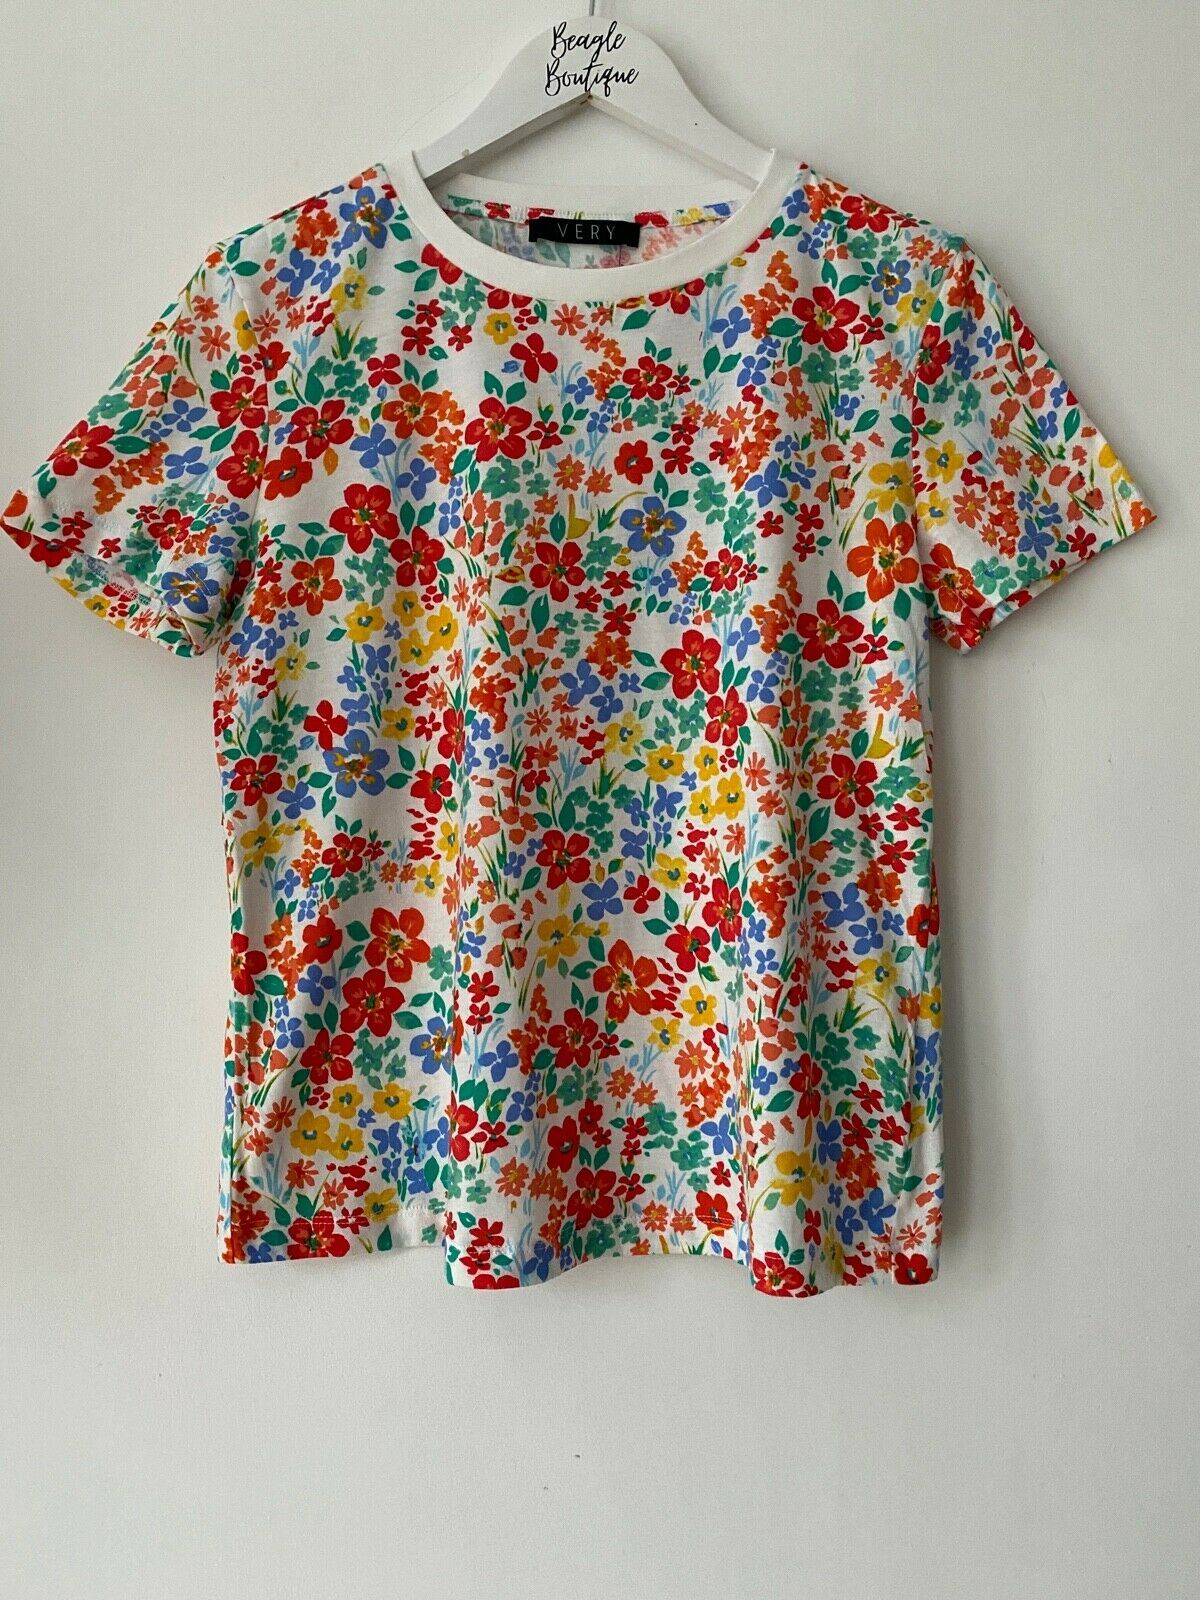 Very Women's Cotton T-Shirt  Hearts, Floral, Pink Sizes 6, 10, 12, 14